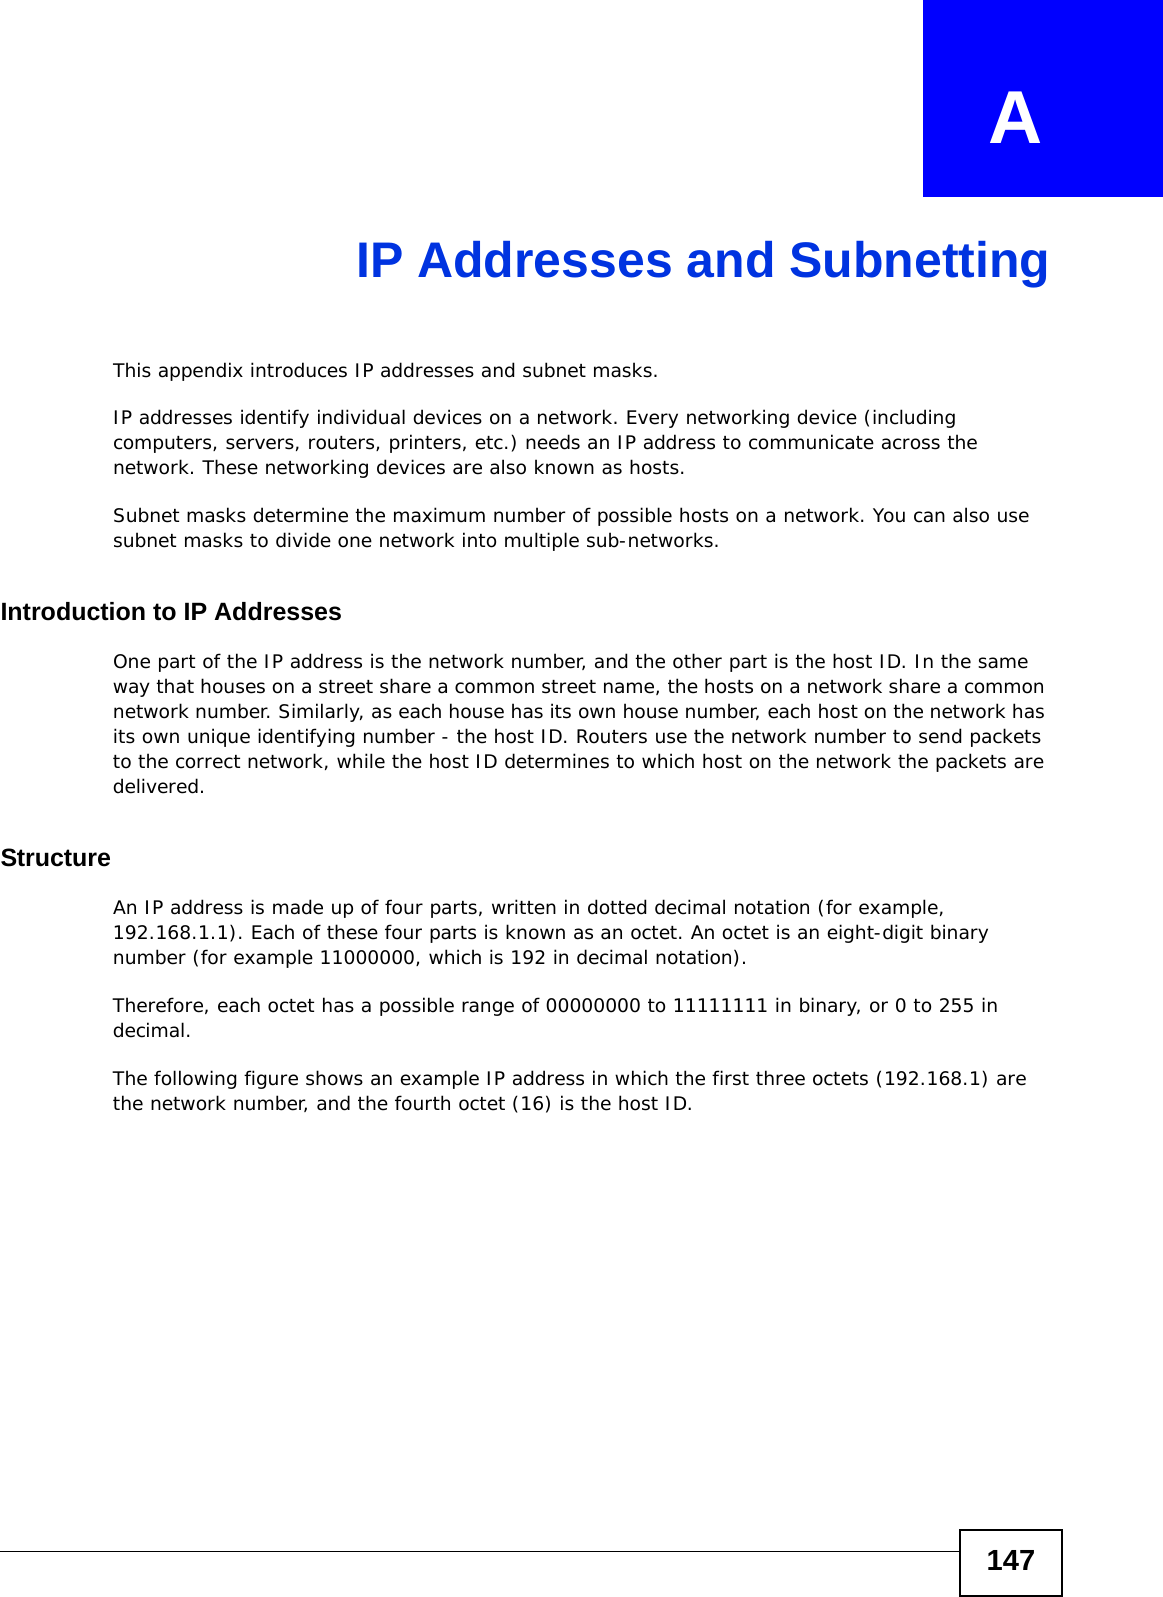 147APPENDIX   AIP Addresses and SubnettingThis appendix introduces IP addresses and subnet masks. IP addresses identify individual devices on a network. Every networking device (including computers, servers, routers, printers, etc.) needs an IP address to communicate across the network. These networking devices are also known as hosts.Subnet masks determine the maximum number of possible hosts on a network. You can also use subnet masks to divide one network into multiple sub-networks.Introduction to IP AddressesOne part of the IP address is the network number, and the other part is the host ID. In the same way that houses on a street share a common street name, the hosts on a network share a common network number. Similarly, as each house has its own house number, each host on the network has its own unique identifying number - the host ID. Routers use the network number to send packets to the correct network, while the host ID determines to which host on the network the packets are delivered.StructureAn IP address is made up of four parts, written in dotted decimal notation (for example, 192.168.1.1). Each of these four parts is known as an octet. An octet is an eight-digit binary number (for example 11000000, which is 192 in decimal notation). Therefore, each octet has a possible range of 00000000 to 11111111 in binary, or 0 to 255 in decimal.The following figure shows an example IP address in which the first three octets (192.168.1) are the network number, and the fourth octet (16) is the host ID.